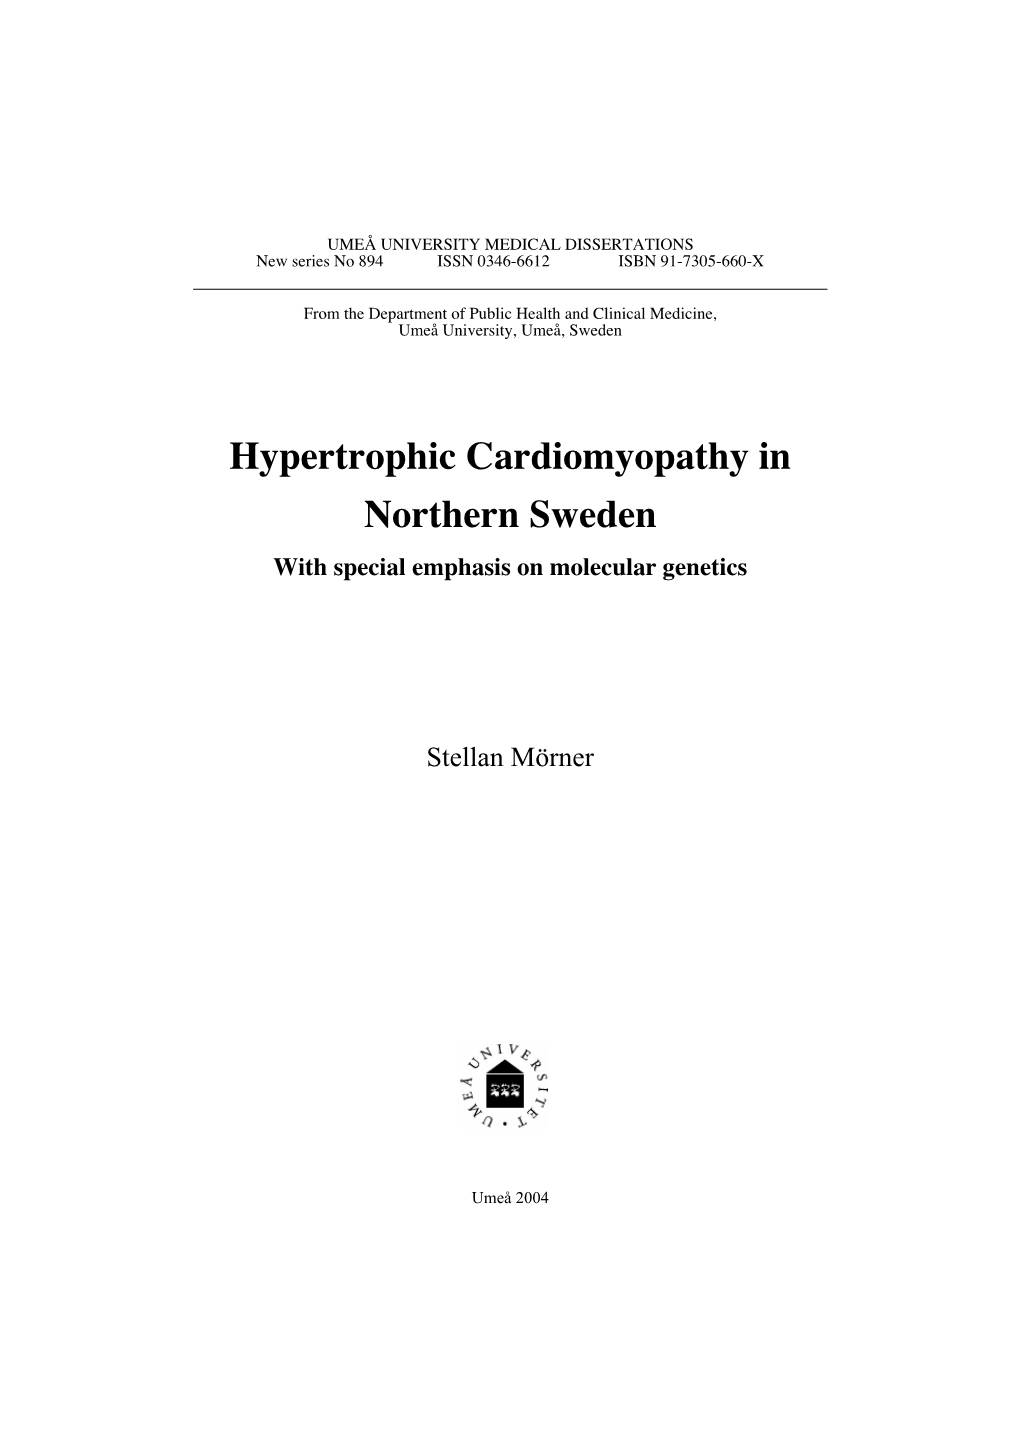 Hypertrophic Cardiomyopathy in Northern Sweden with Special Emphasis on Molecular Genetics